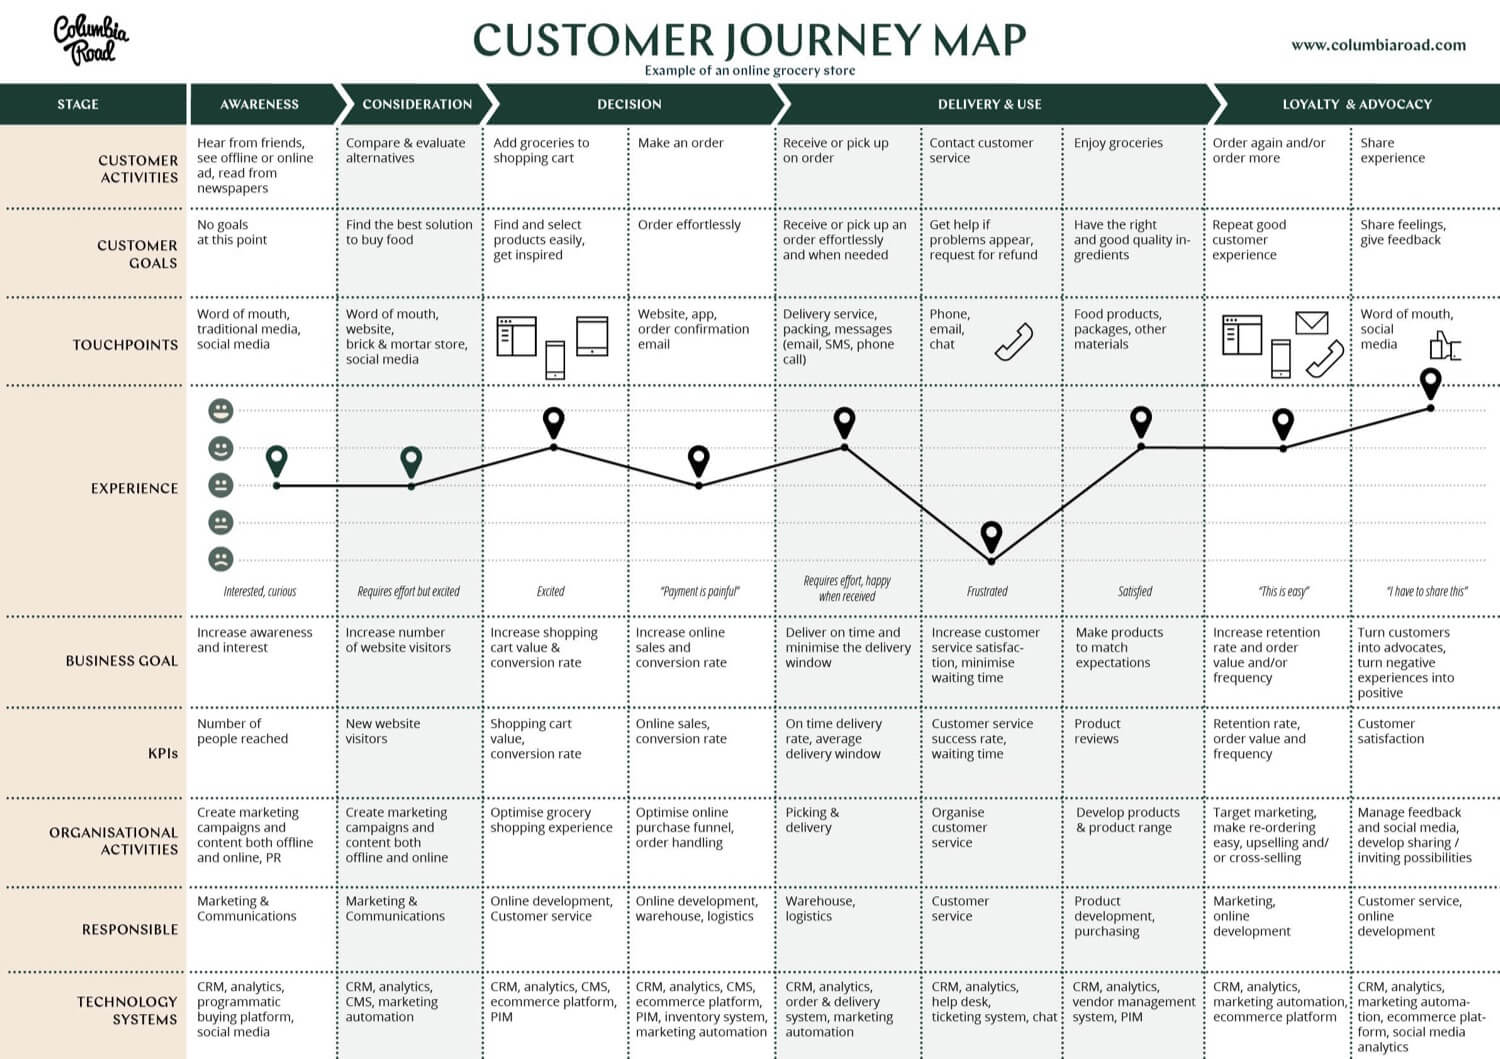 An example of a customer journey map for an online grocery store